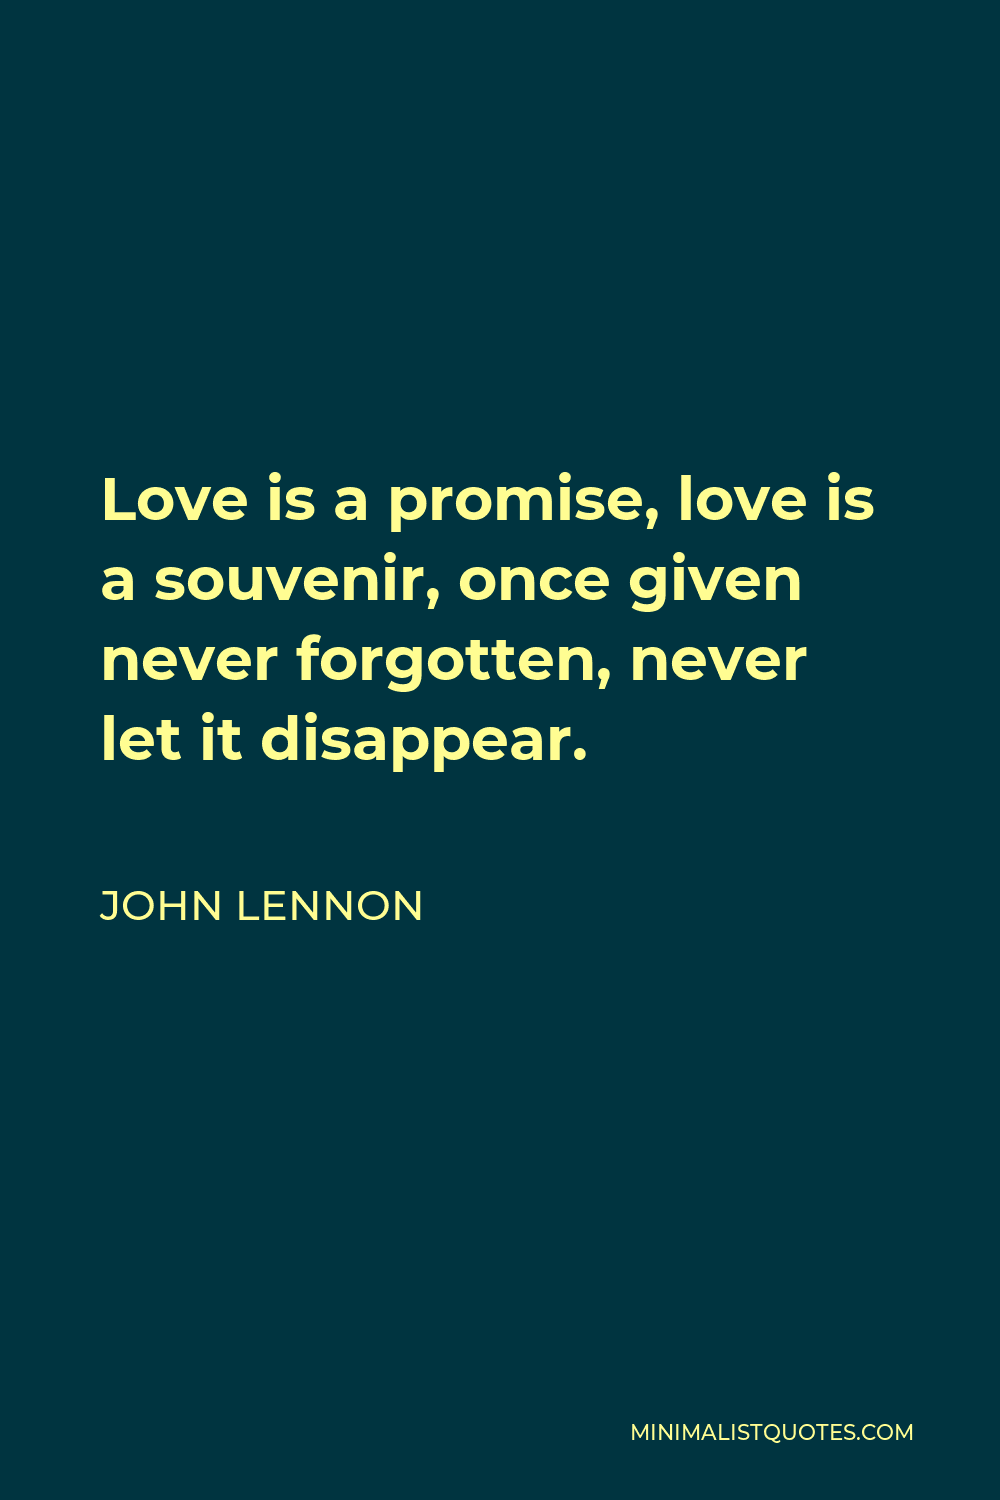 John Lennon Quote - Love is a promise, love is a souvenir, once given never forgotten, never let it disappear.